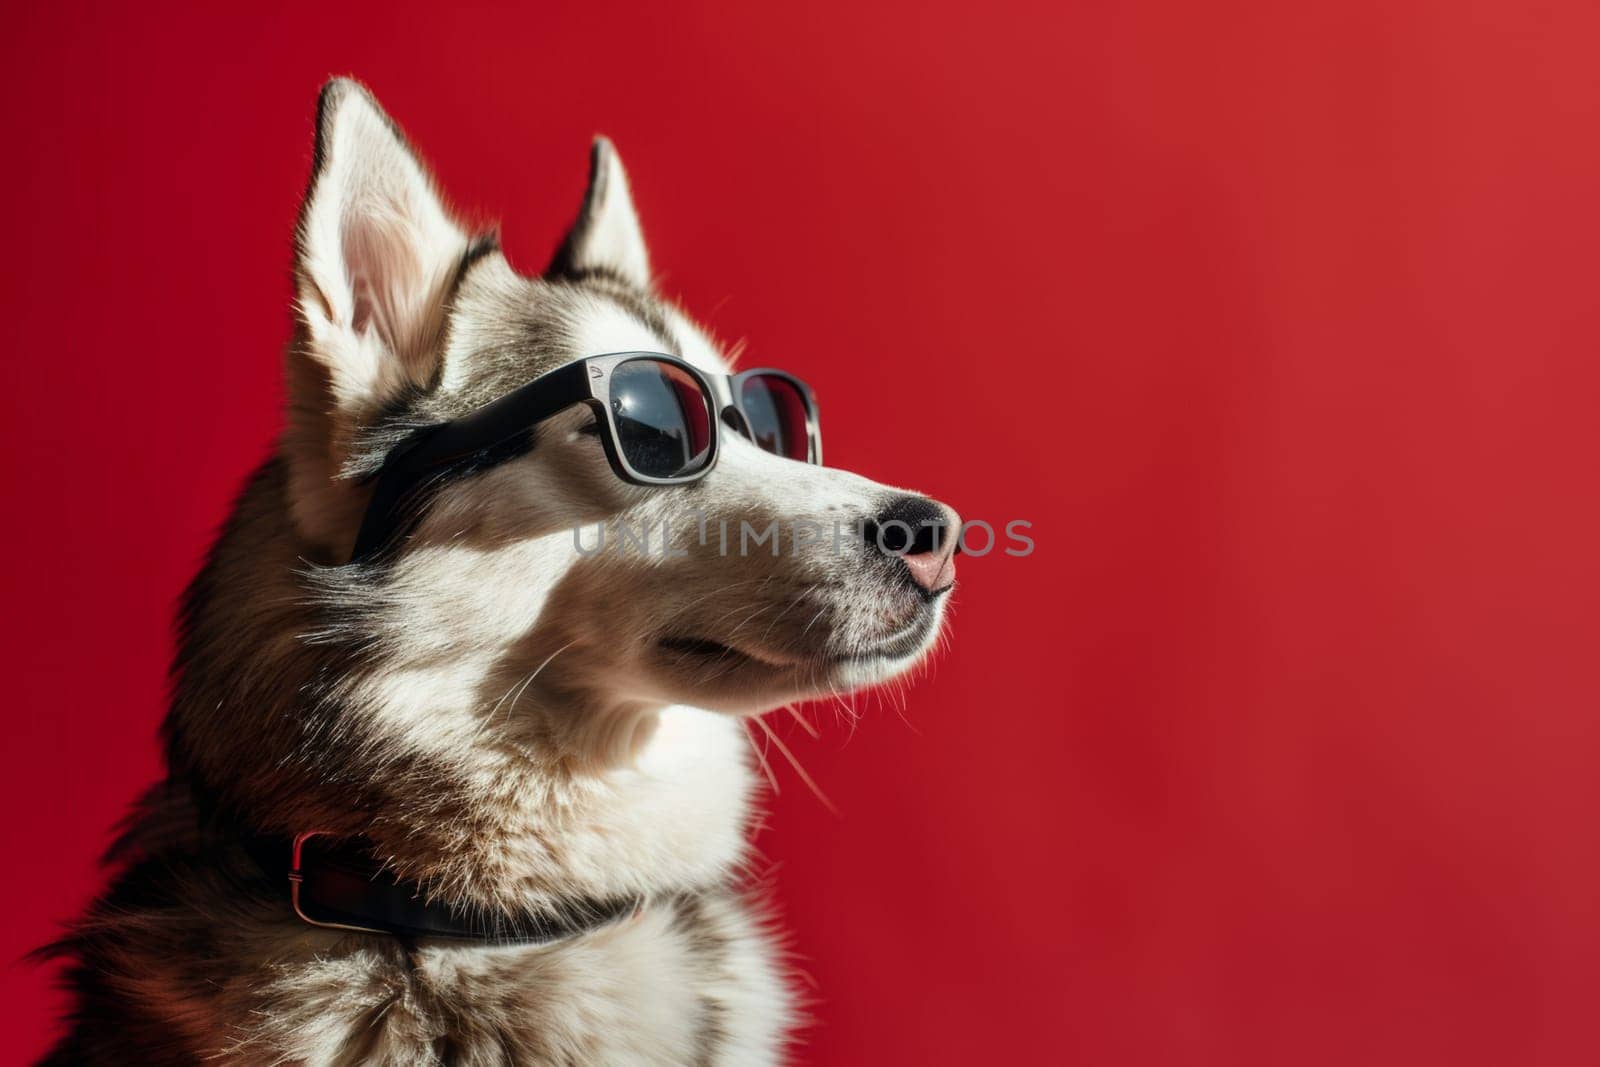 Husky dog wearing sunglasses and standing isolated on red background by papatonic